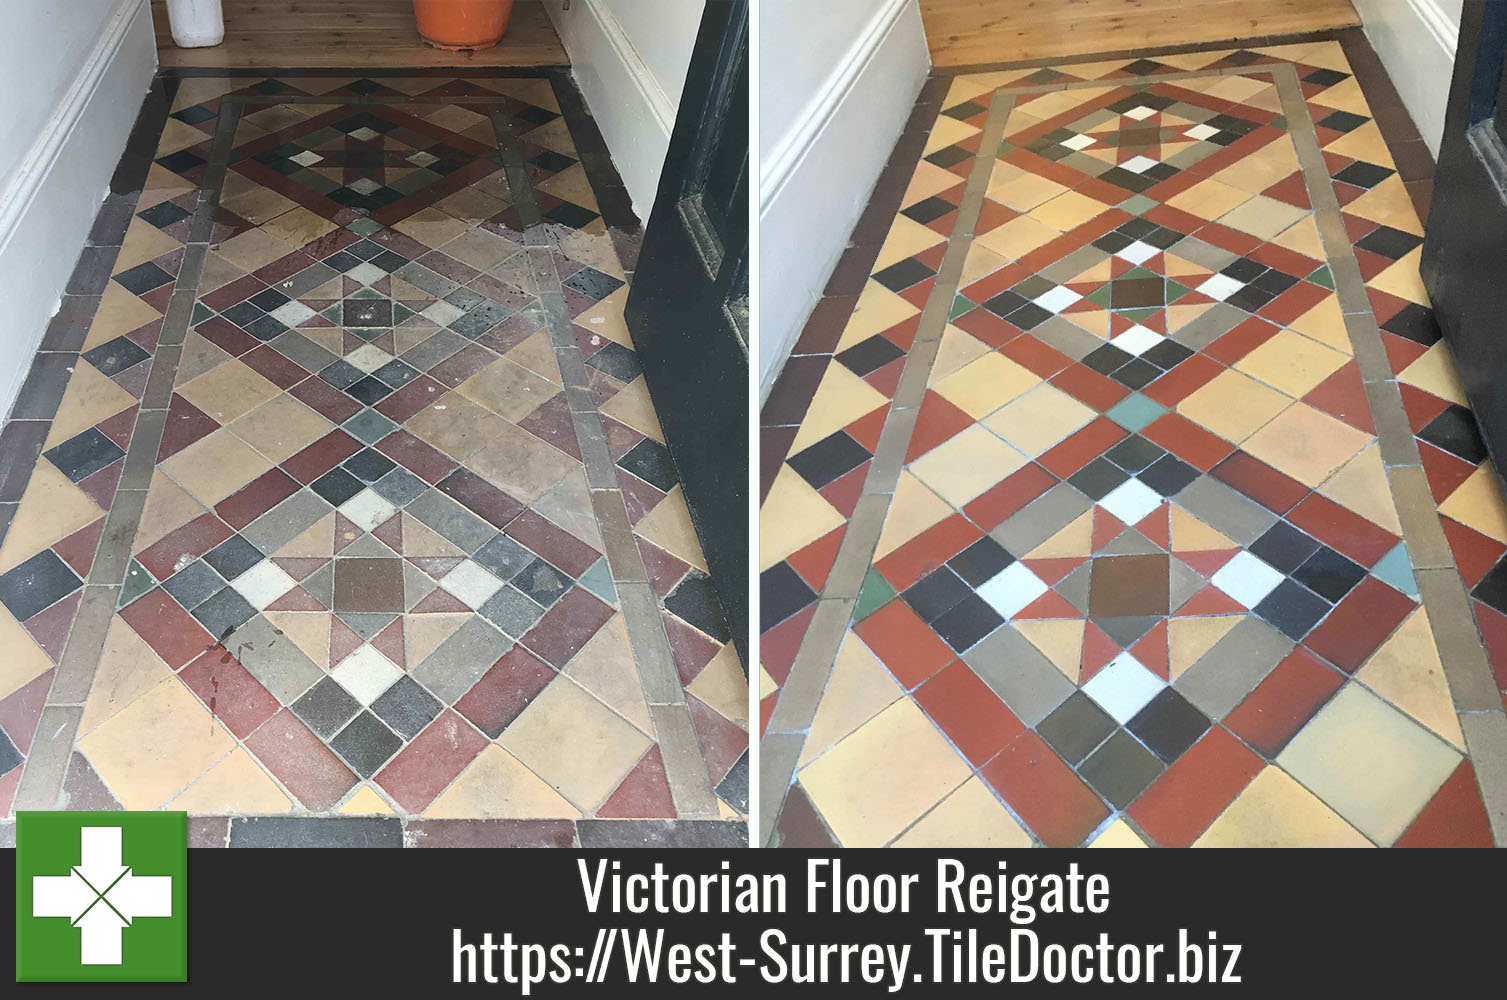 Victorian Hallway Tiles Deep Cleaned with Tile Doctor Oxy-Gel in Reigate